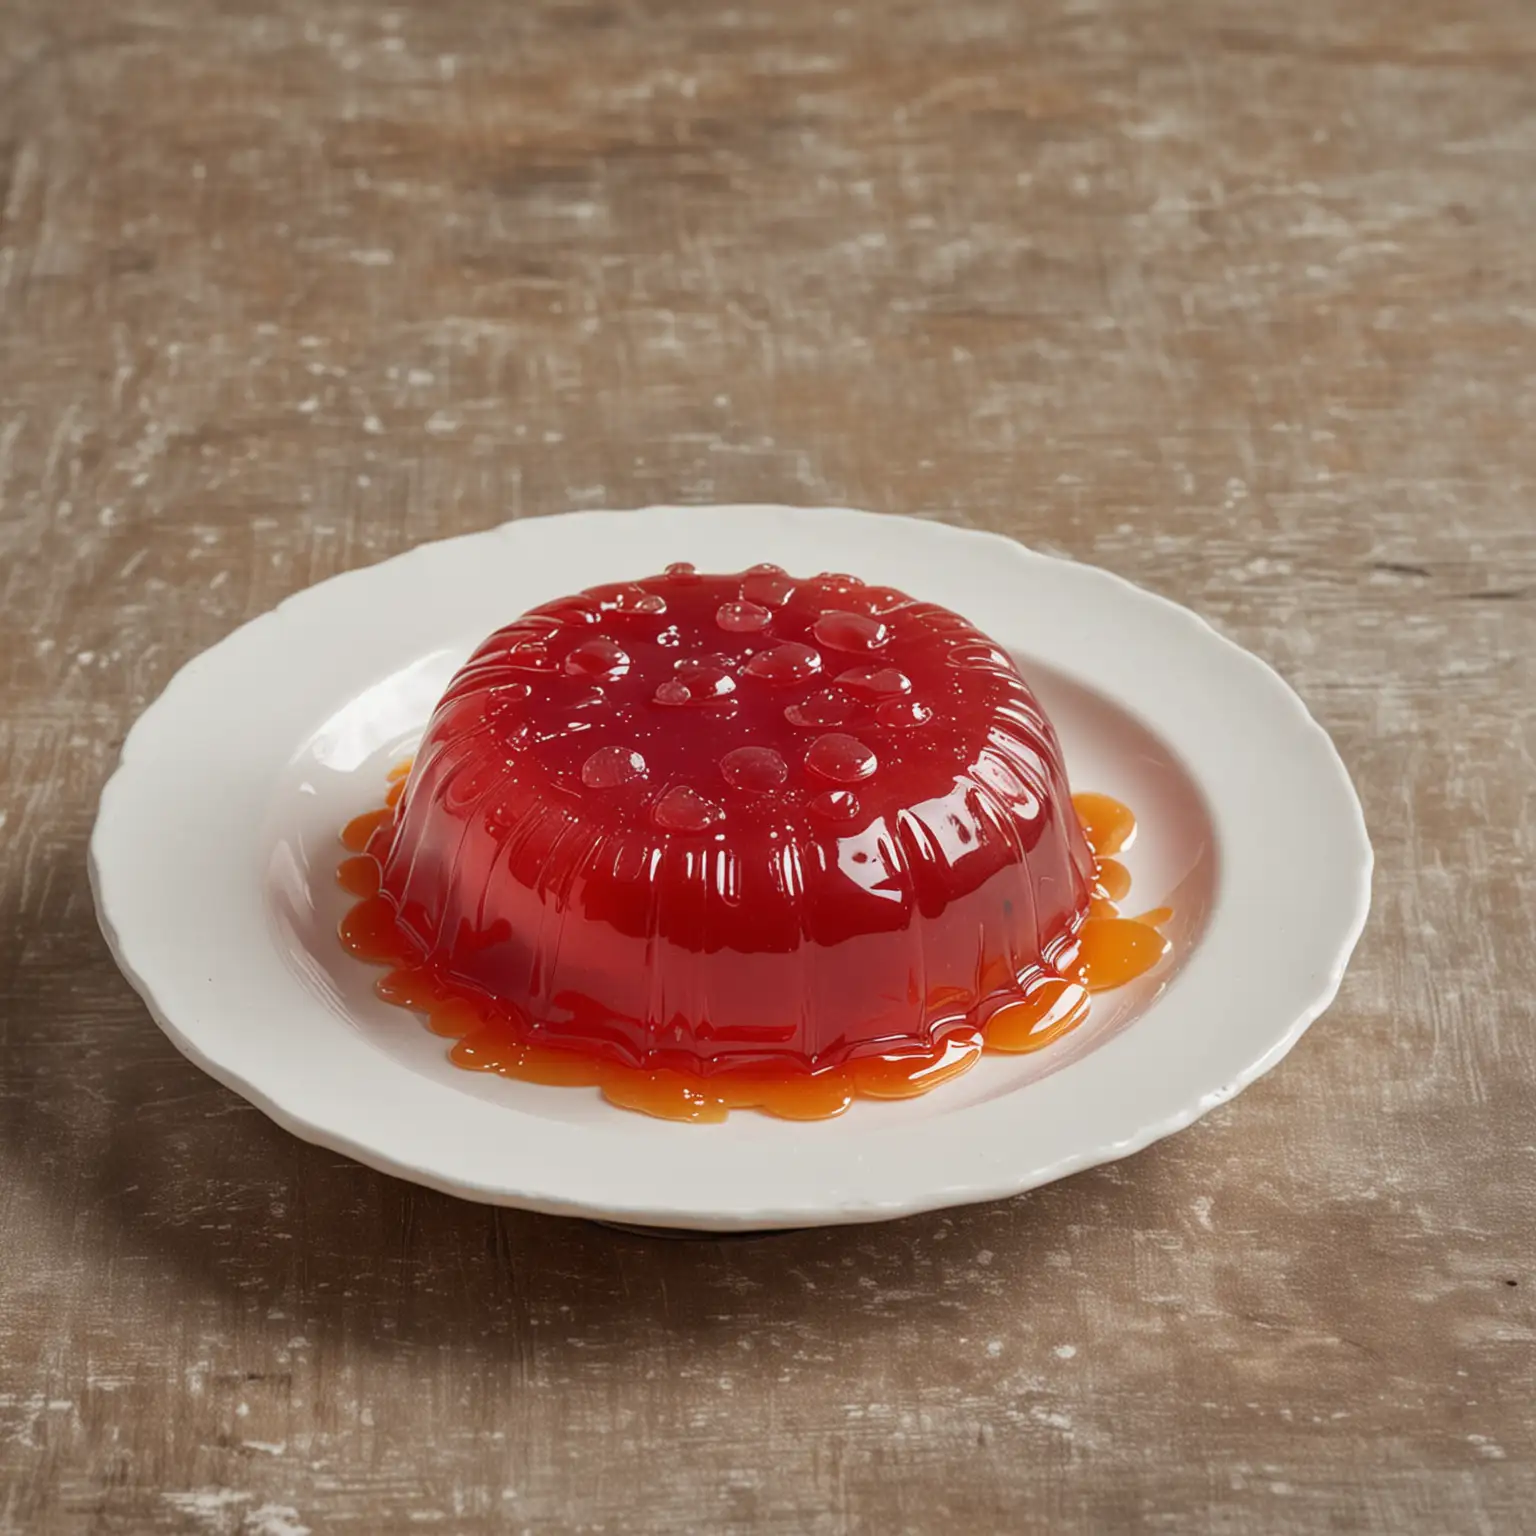 Jelly Wobbling on a Plate on a Kitchen Table